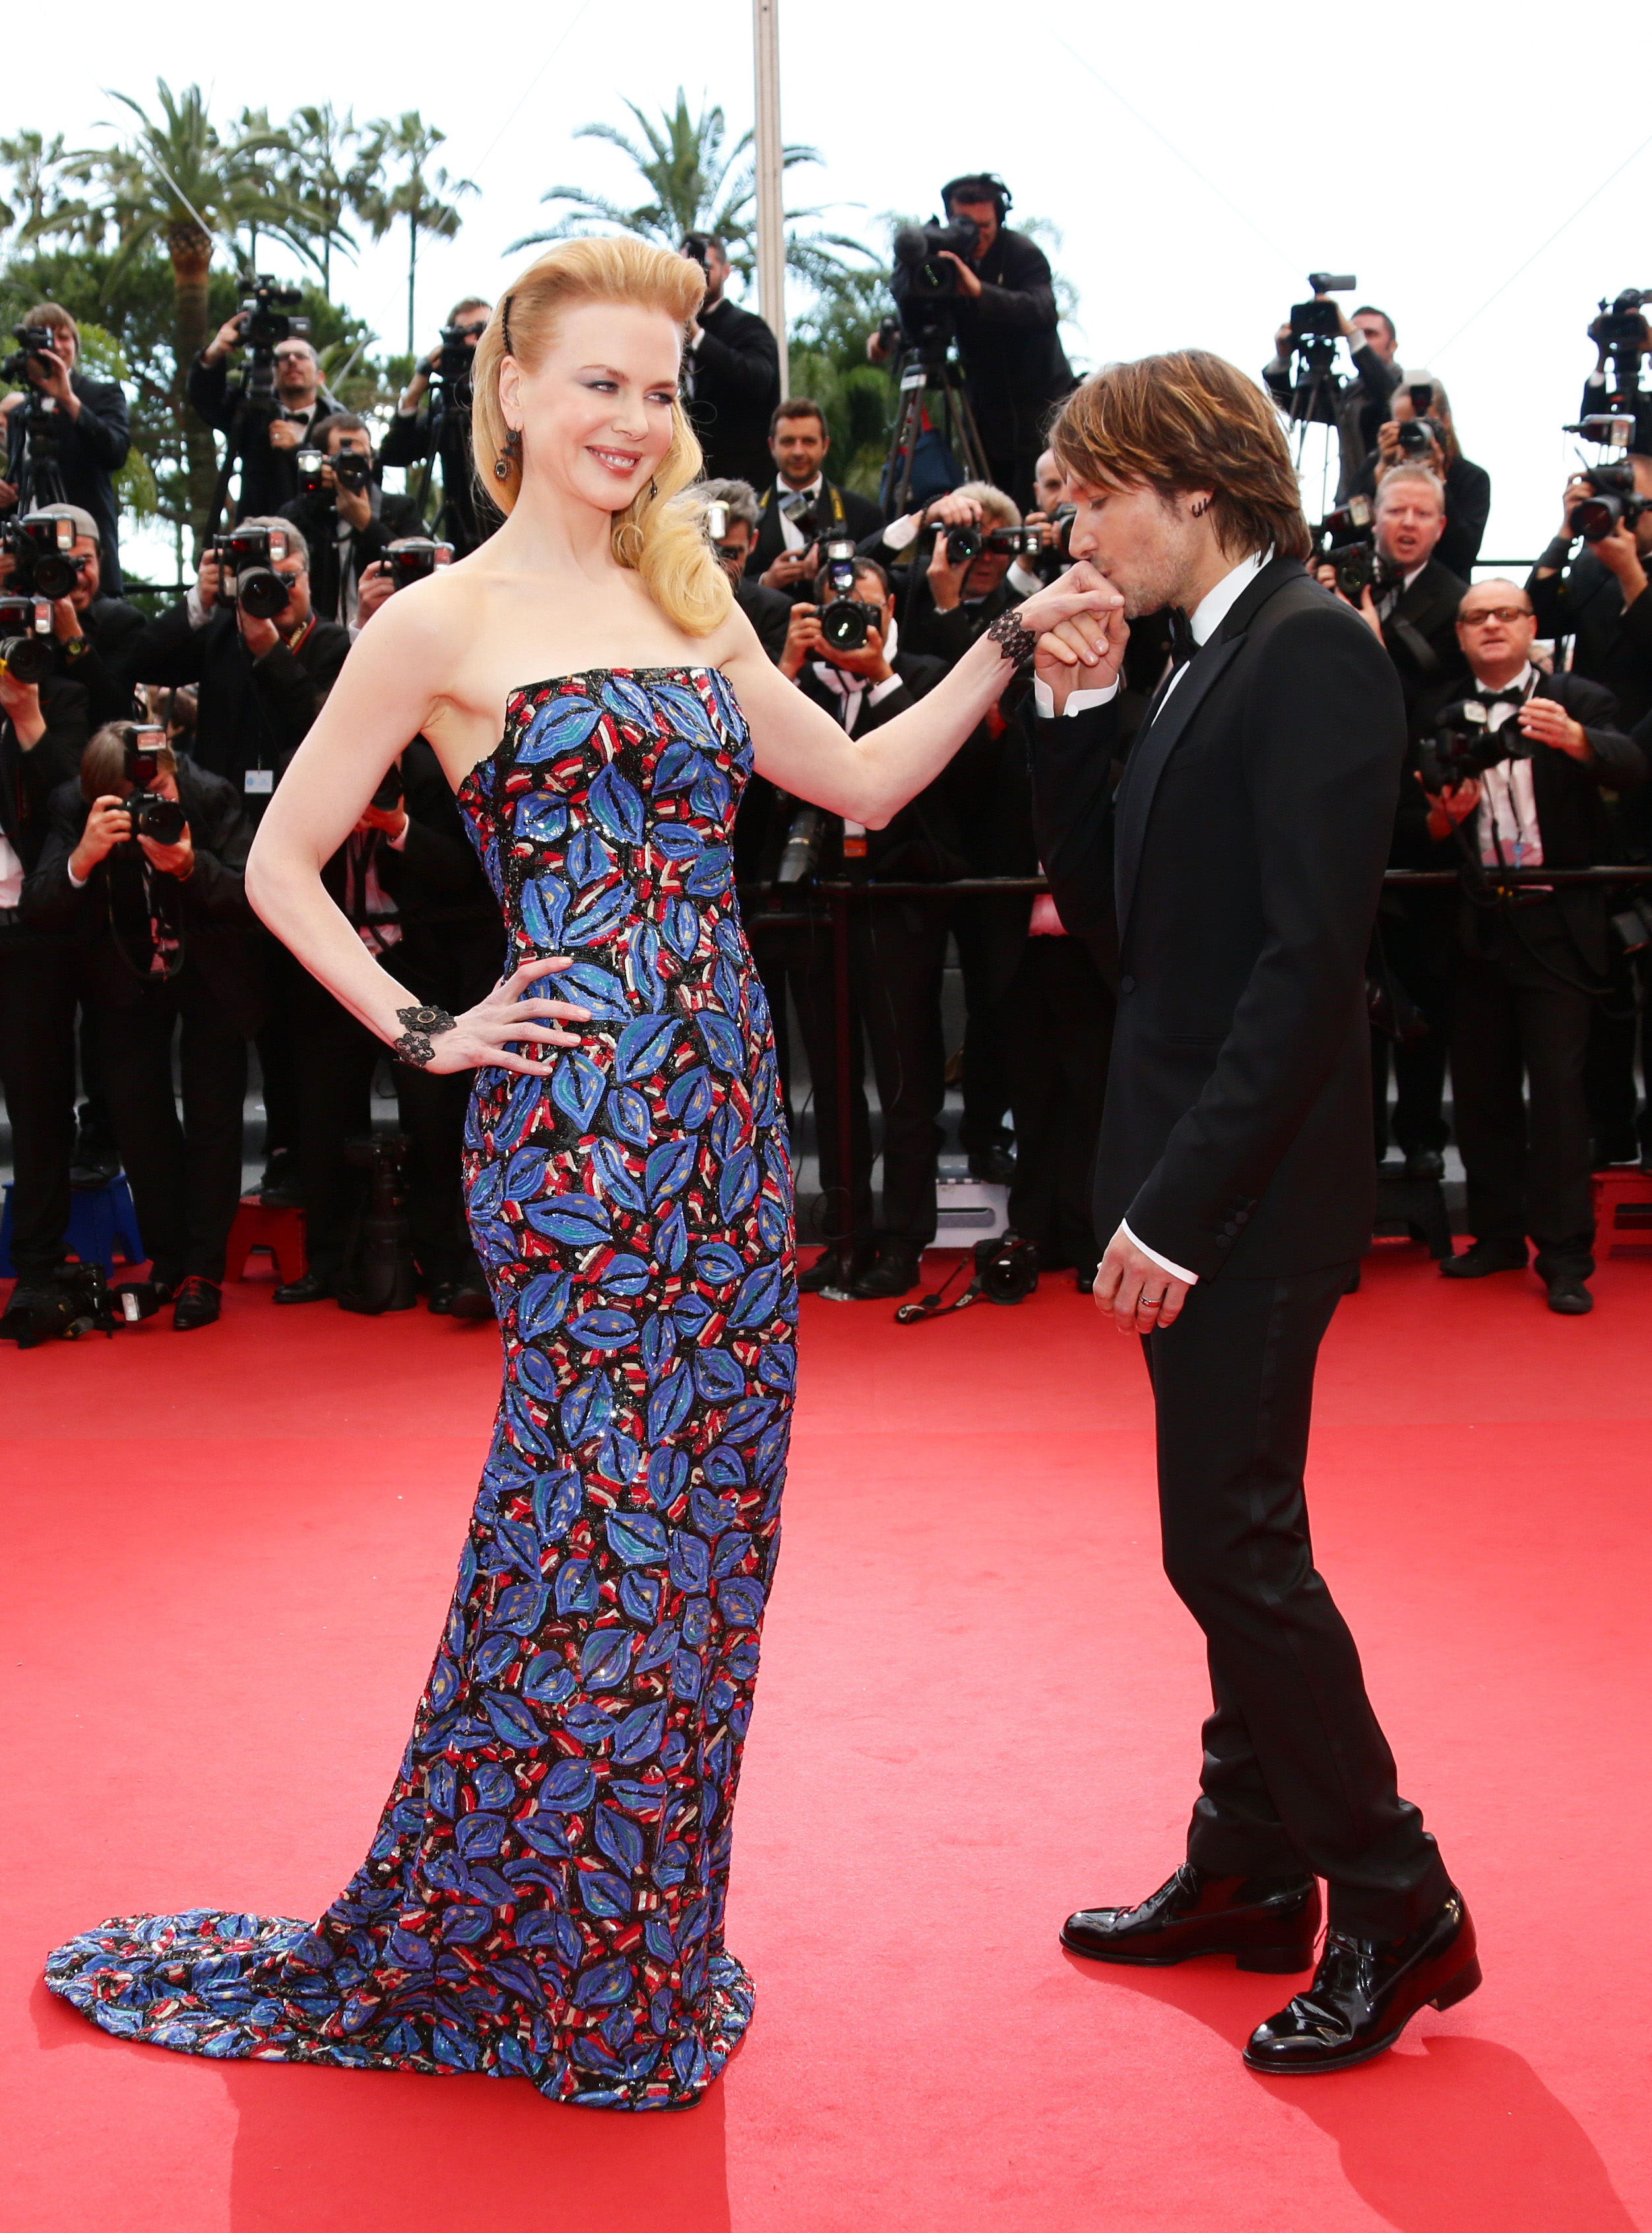 Nicole Kidman and Keith Urban at the 66th Annual Cannes Film Festival in Cannes, France on May 19, 2013 | Source: Getty Images